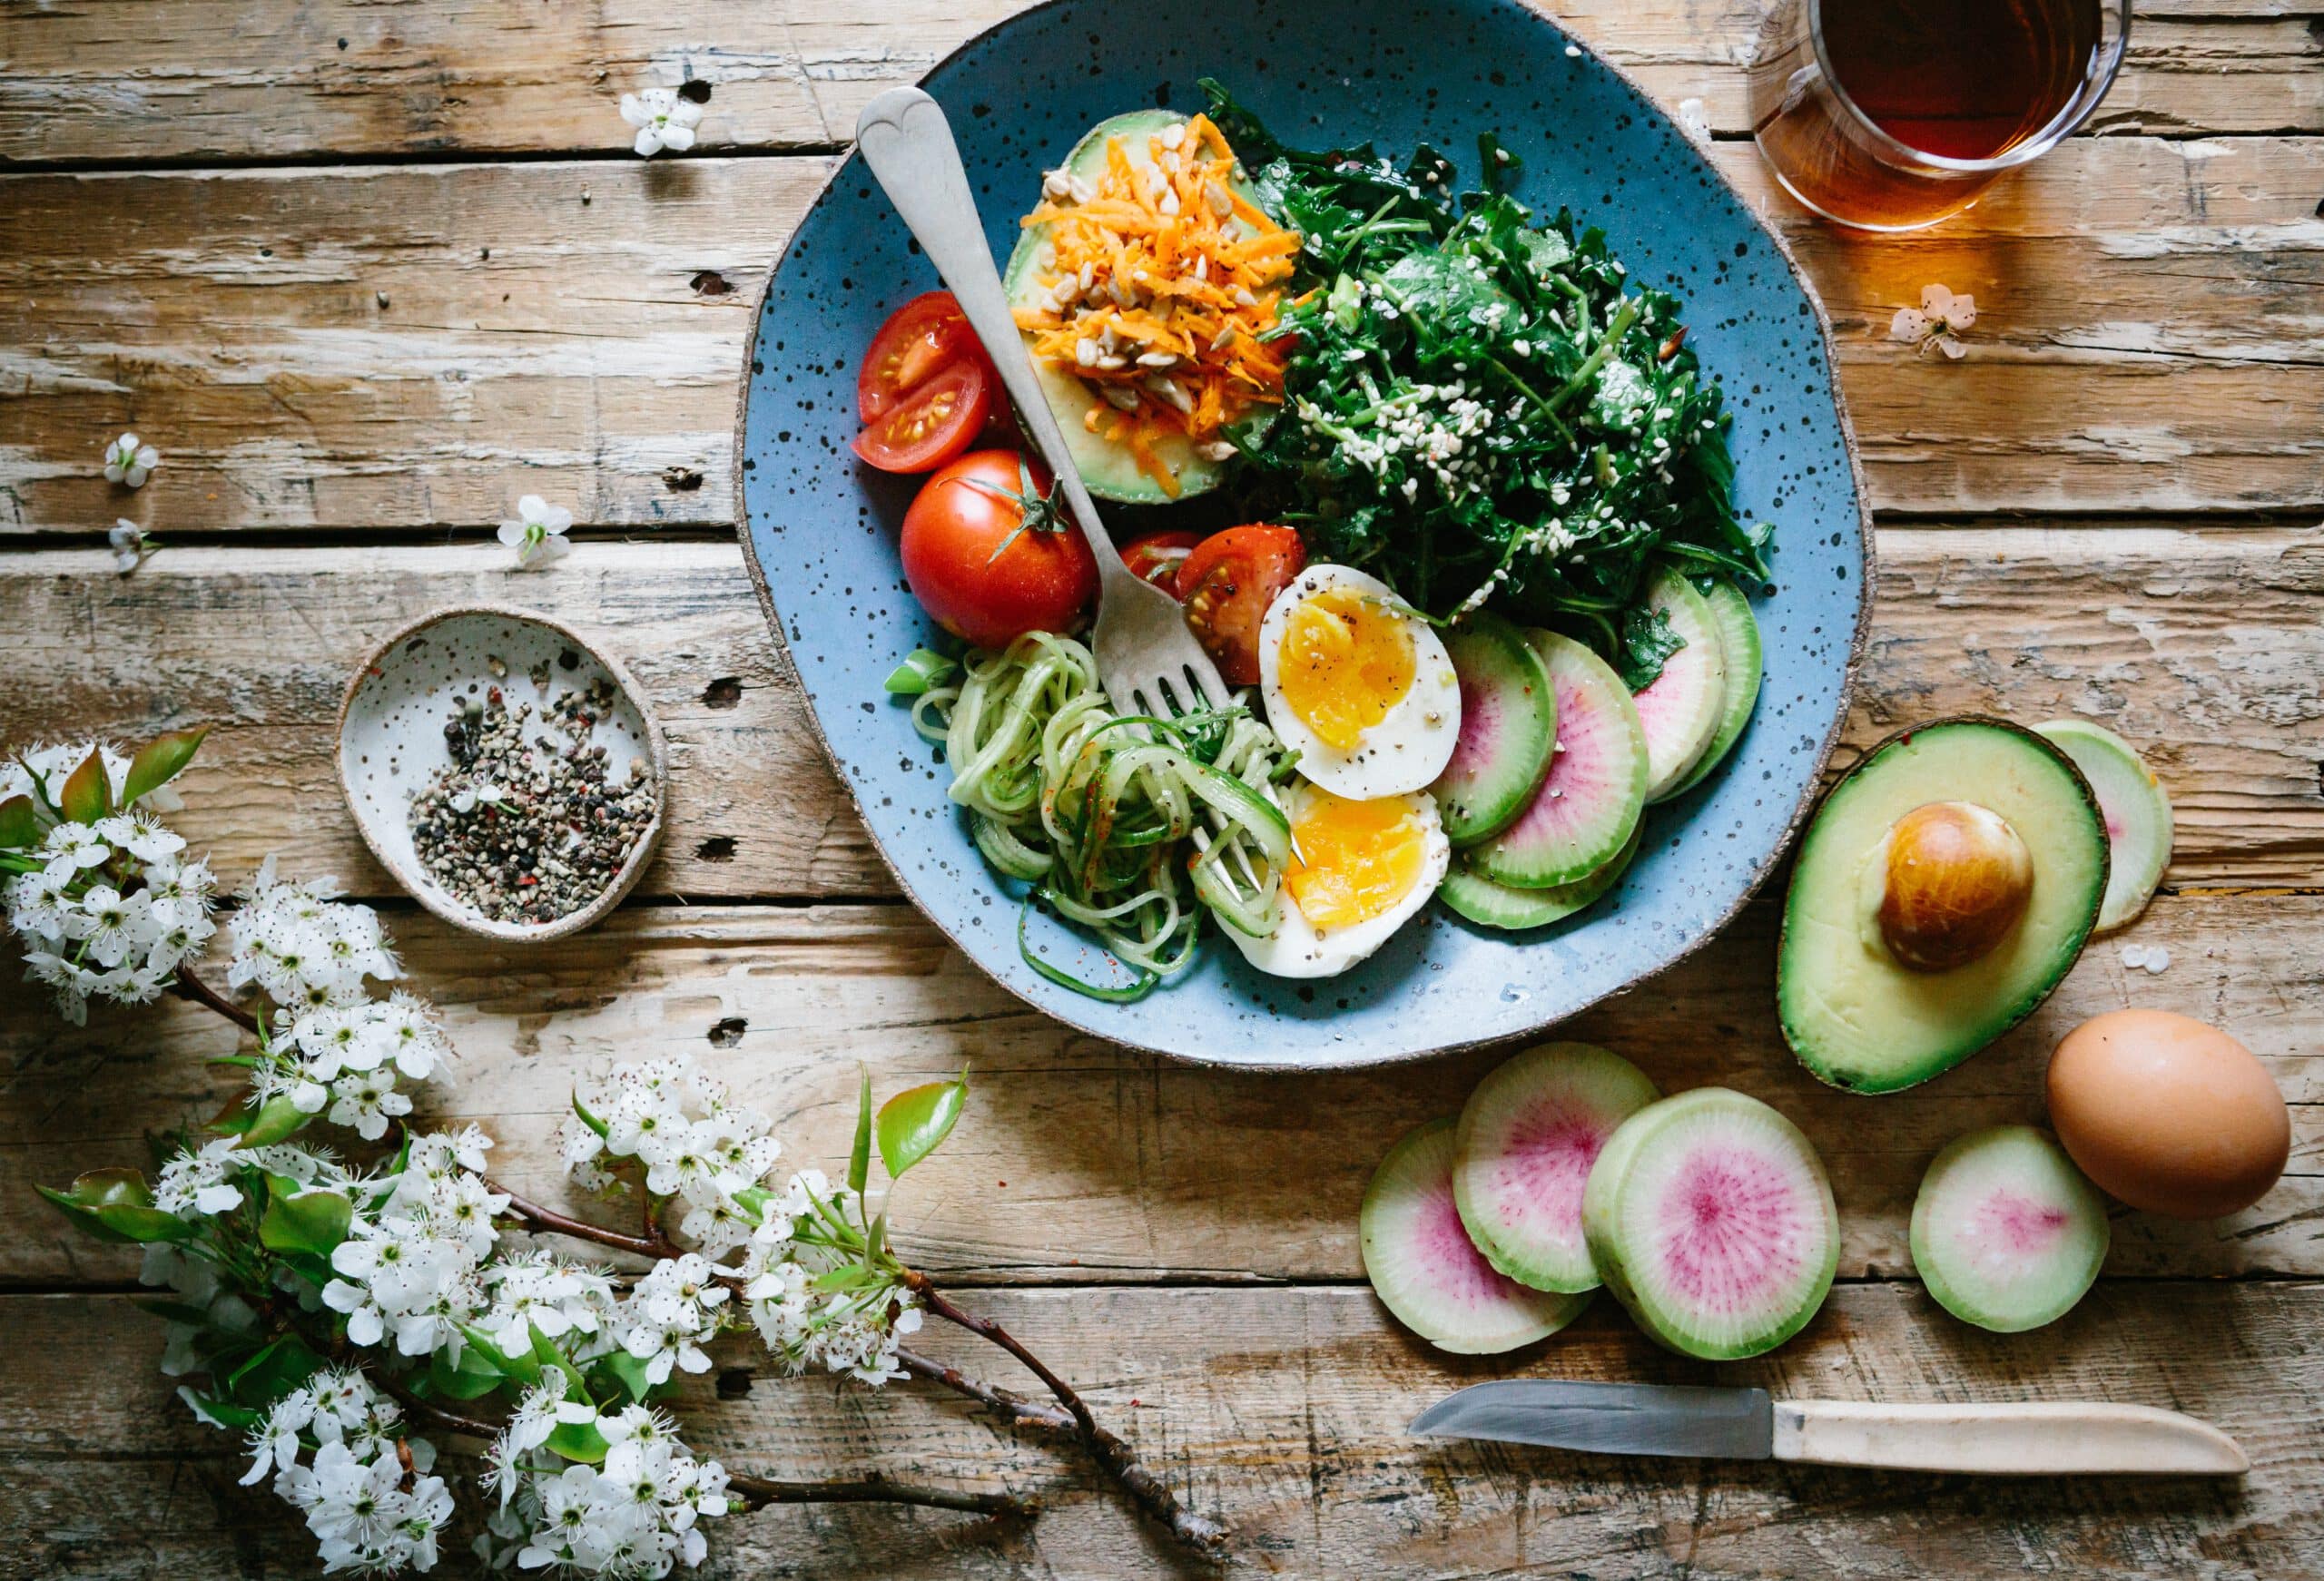 Health Coach vs. Nutritionist vs. Dietitian: What’s The Difference